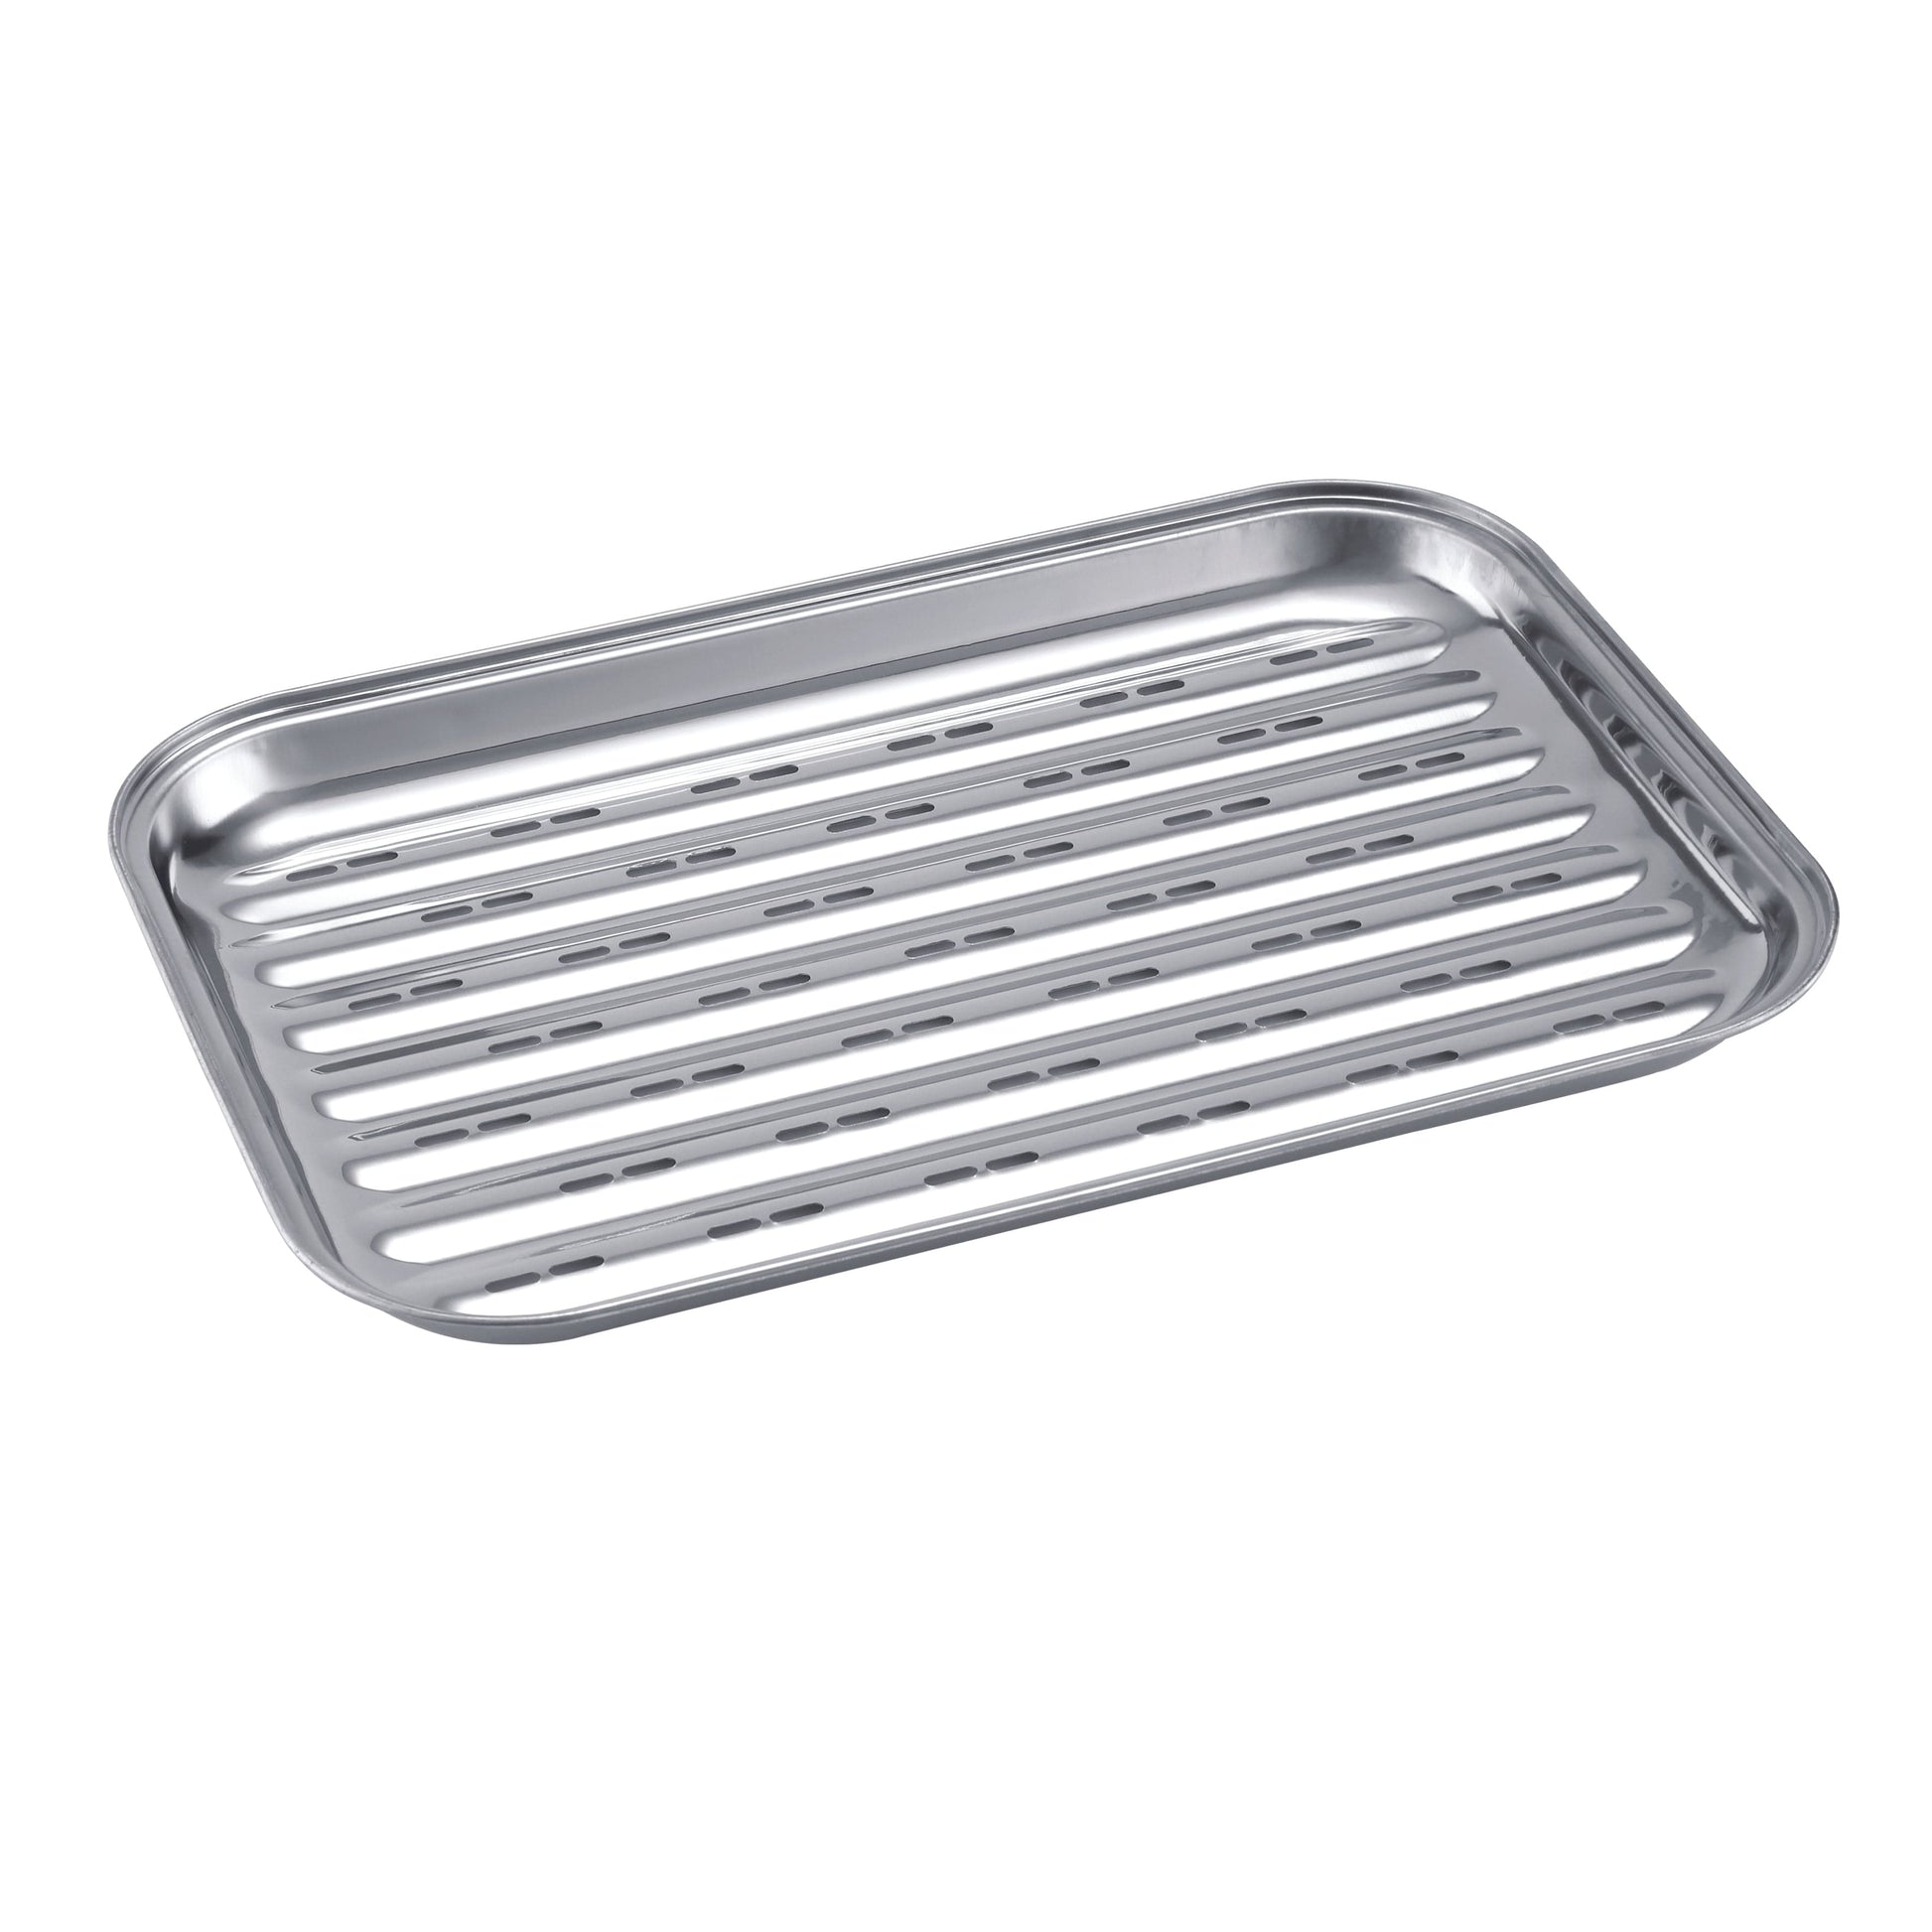 NATERIAL STAINLESS STEEL FOOD TRAY 33X25CM